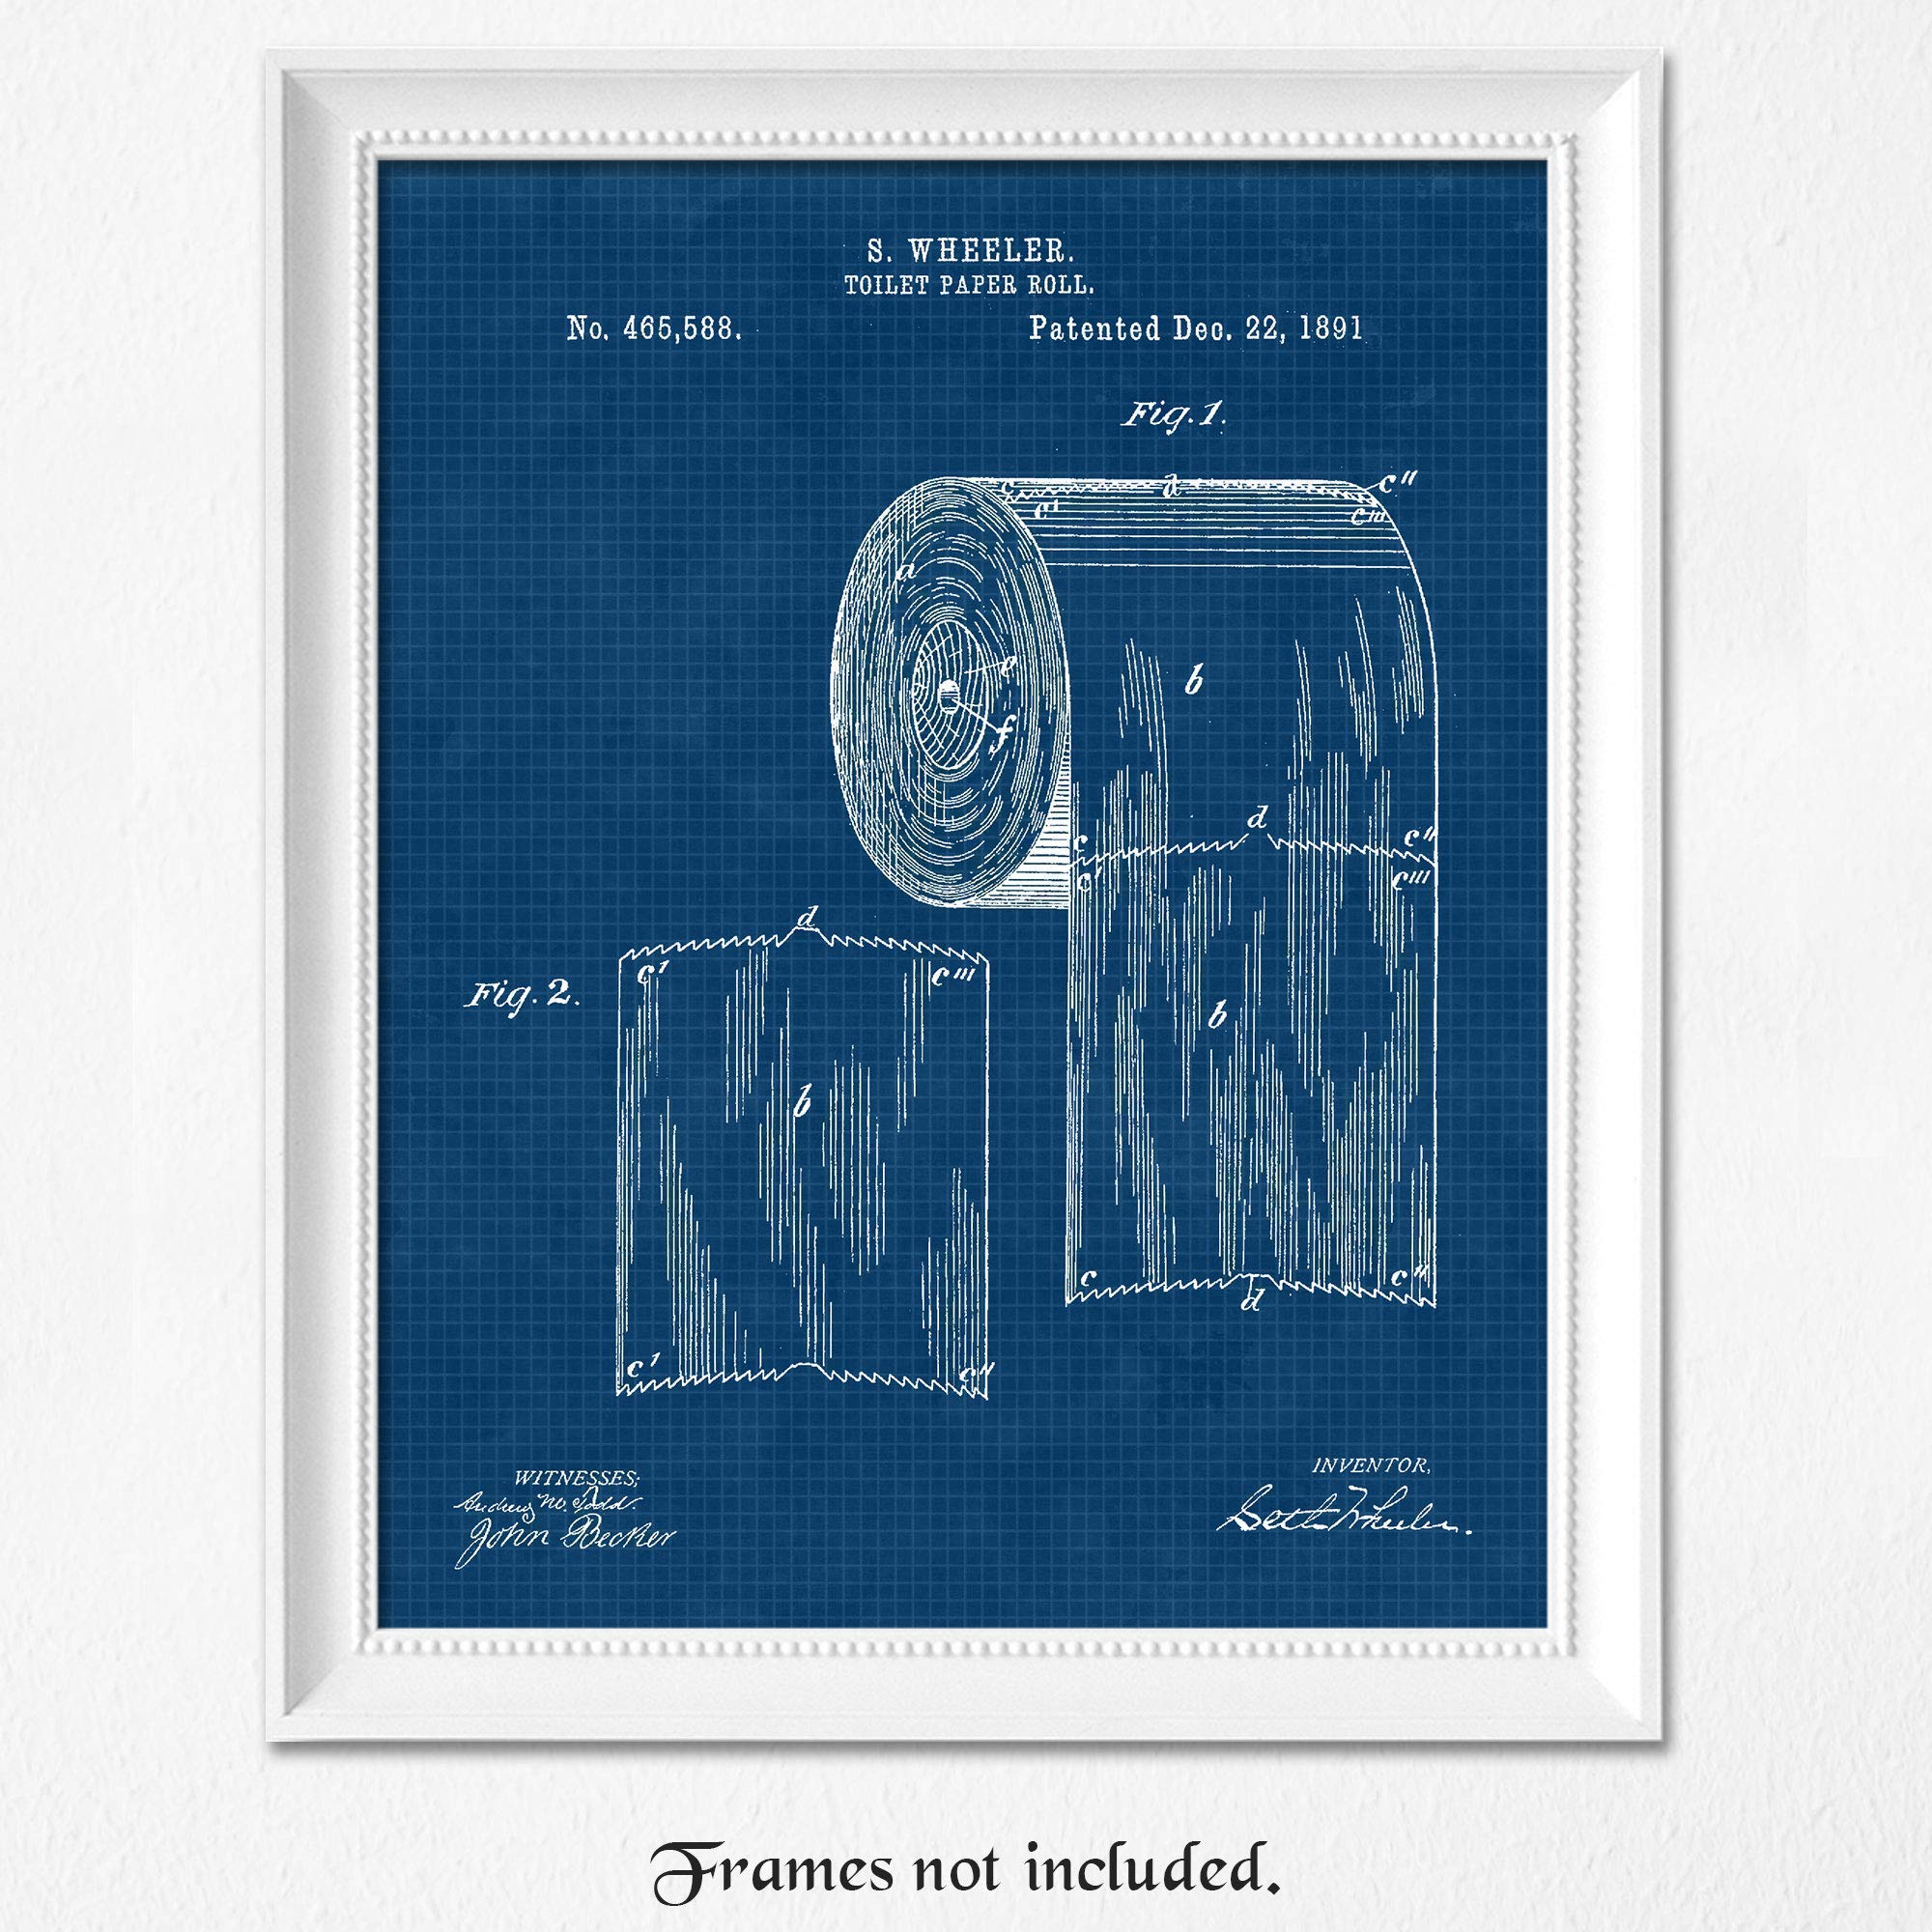 Vintage Toilet Tissue Patent Prints, 1 (11x14) Unframed Photos, Wall Art Decor Gifts for Home Office Man Cave Garage Shop Studio Lounge Bar Diner School College Student Teacher Bathroom Whimsical Fans